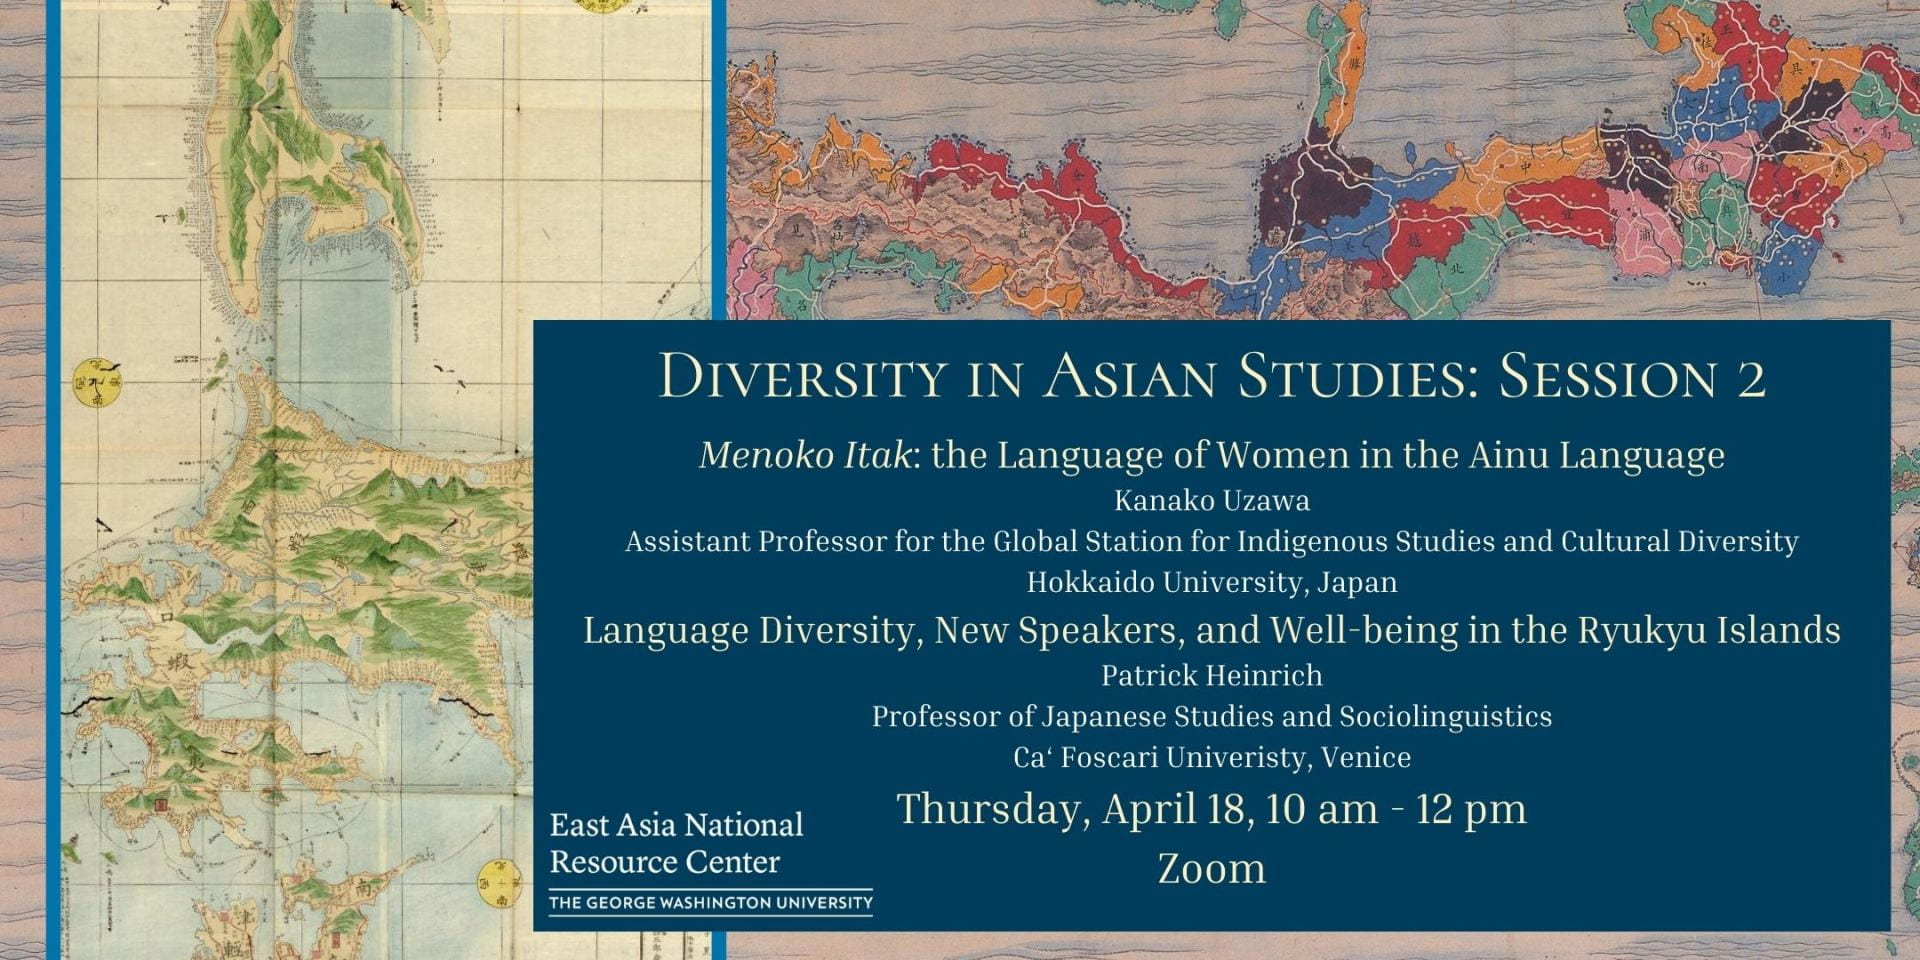 Flyer for Diversity in Asian Studies Session 2 with event information and historic maps of Hokkaido and Okinawa